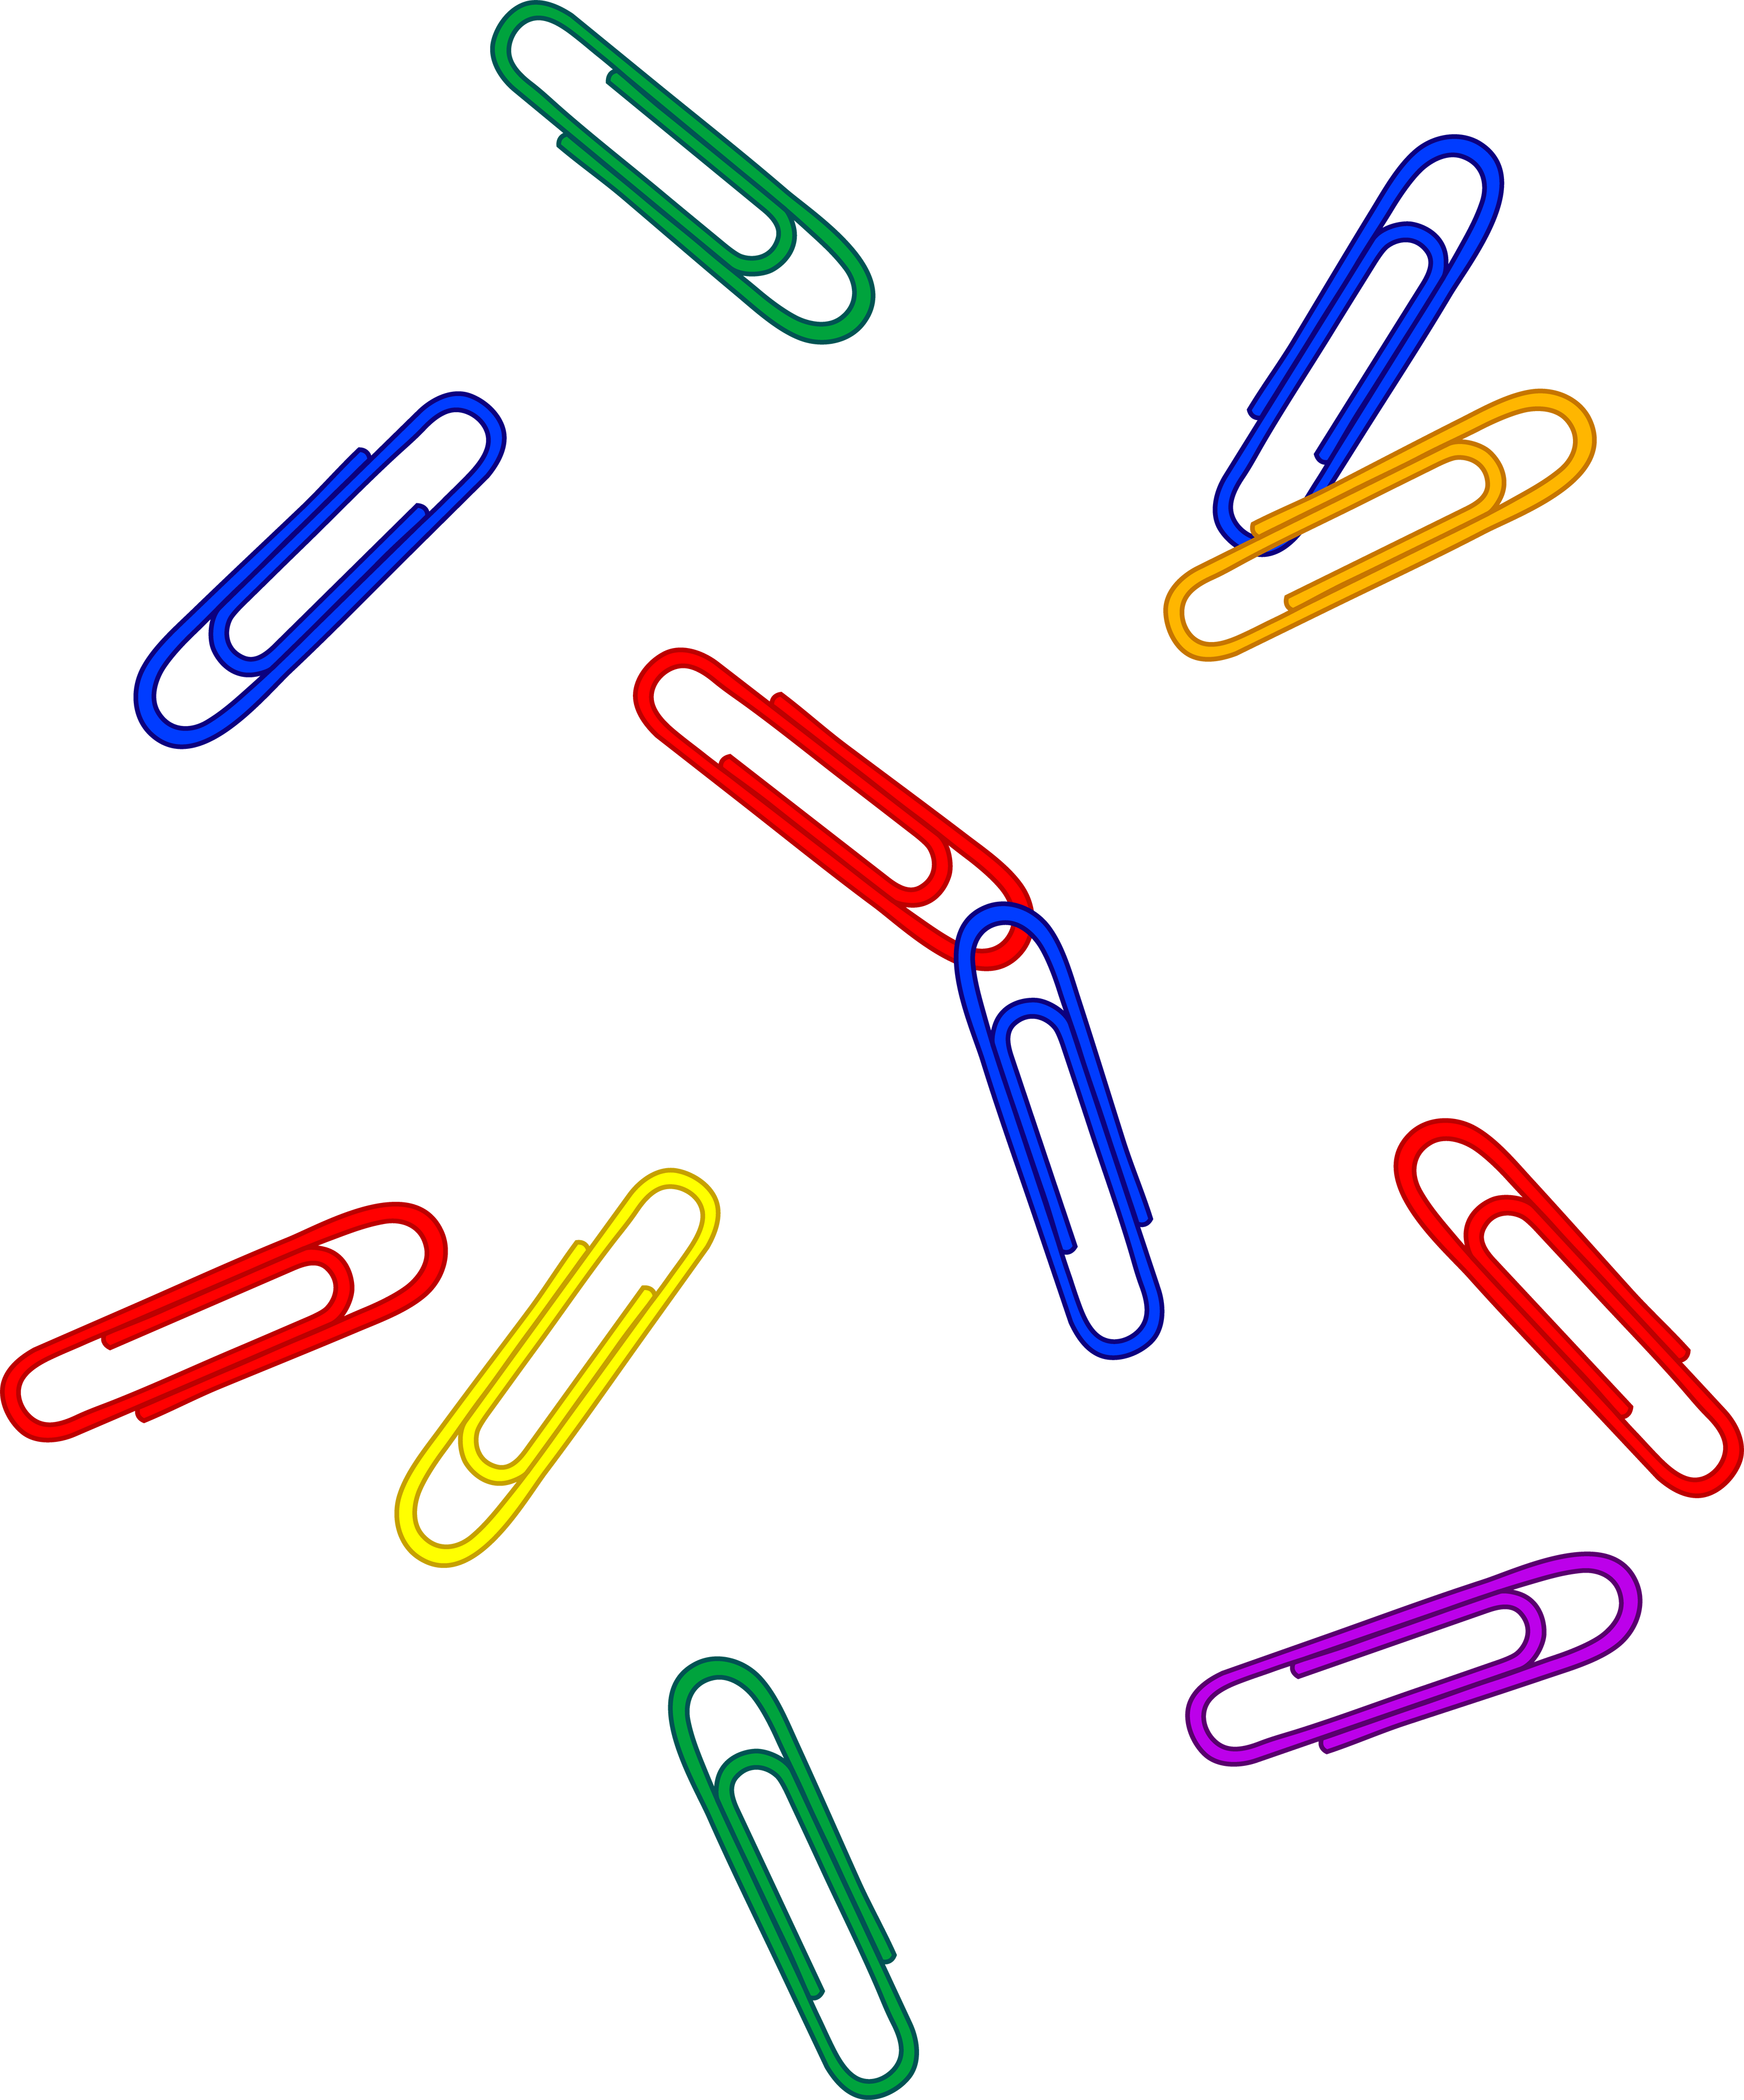 Scattered Colorful Paper Clips - Free Clip Art